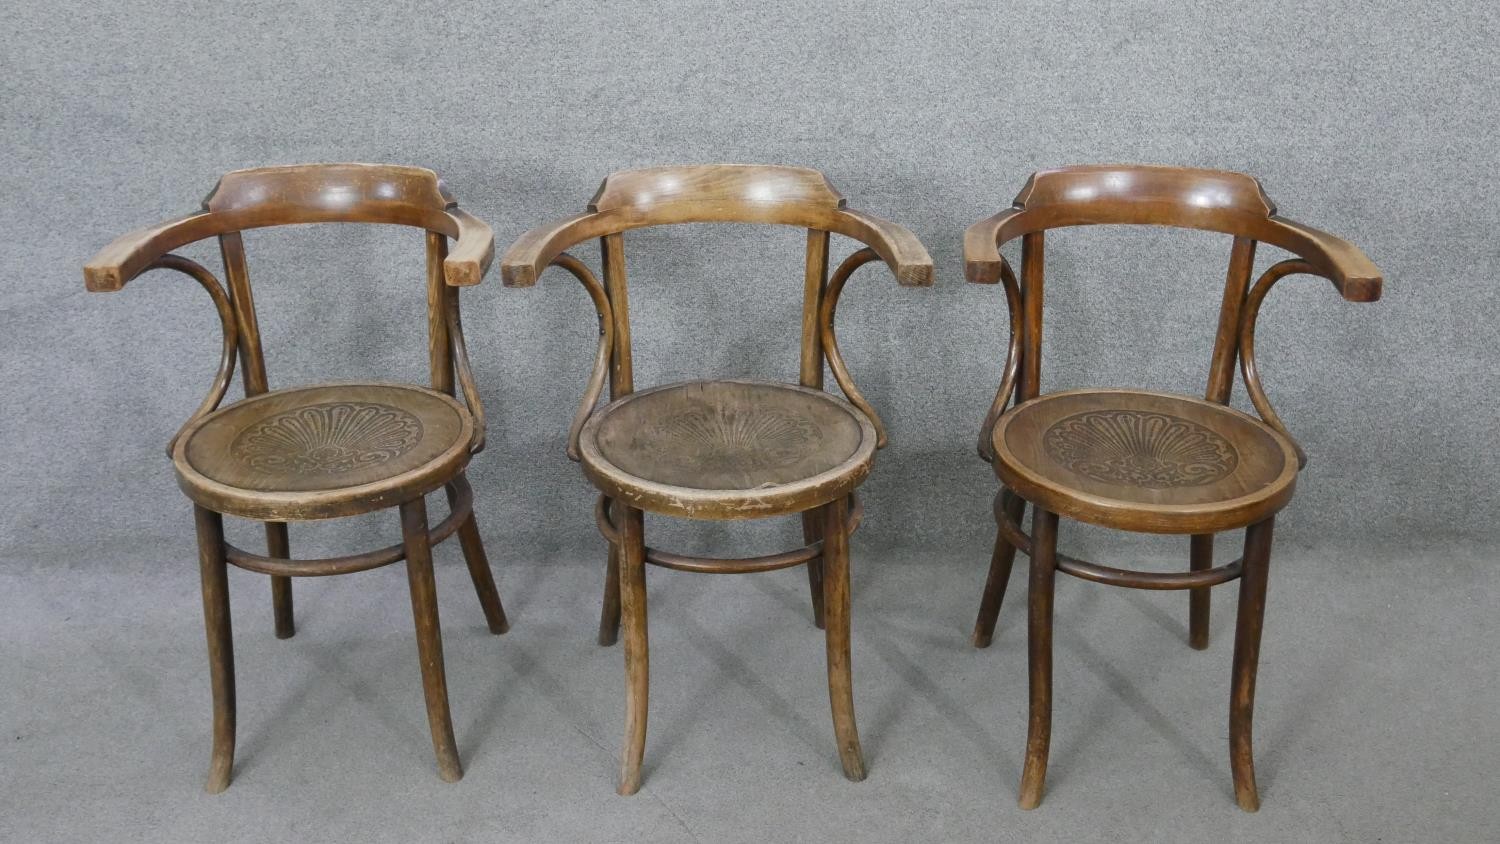 A set of three bentwood armchairs with floral embossed panel seats.